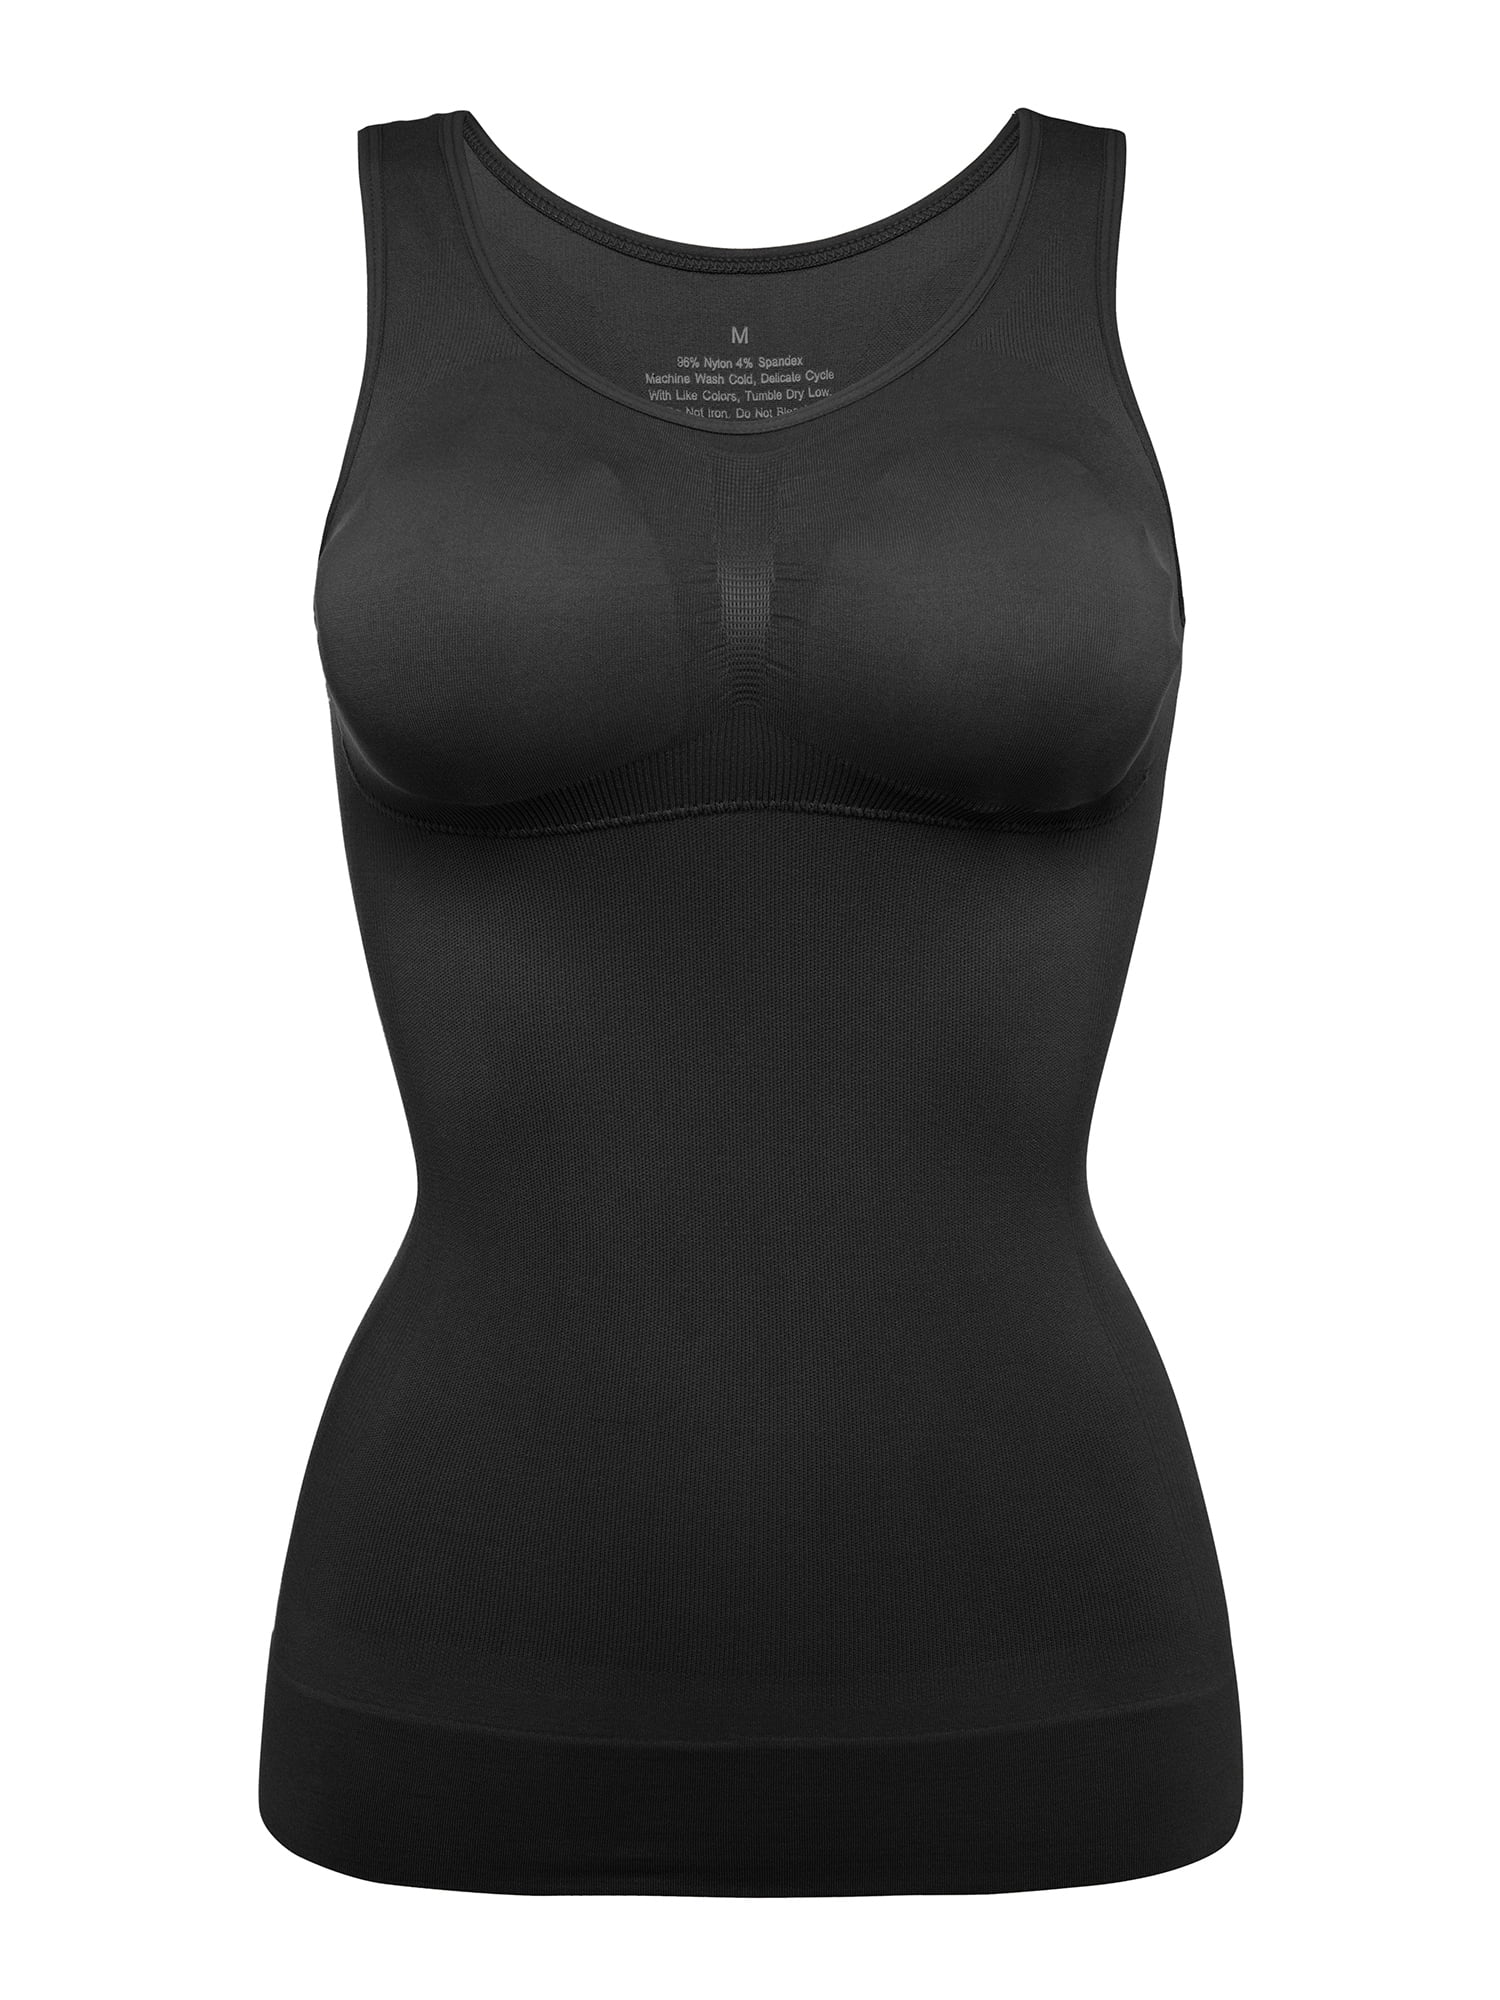 Tank Tops for Women Firm Sexy Sheer Shaping Underwire Camisole